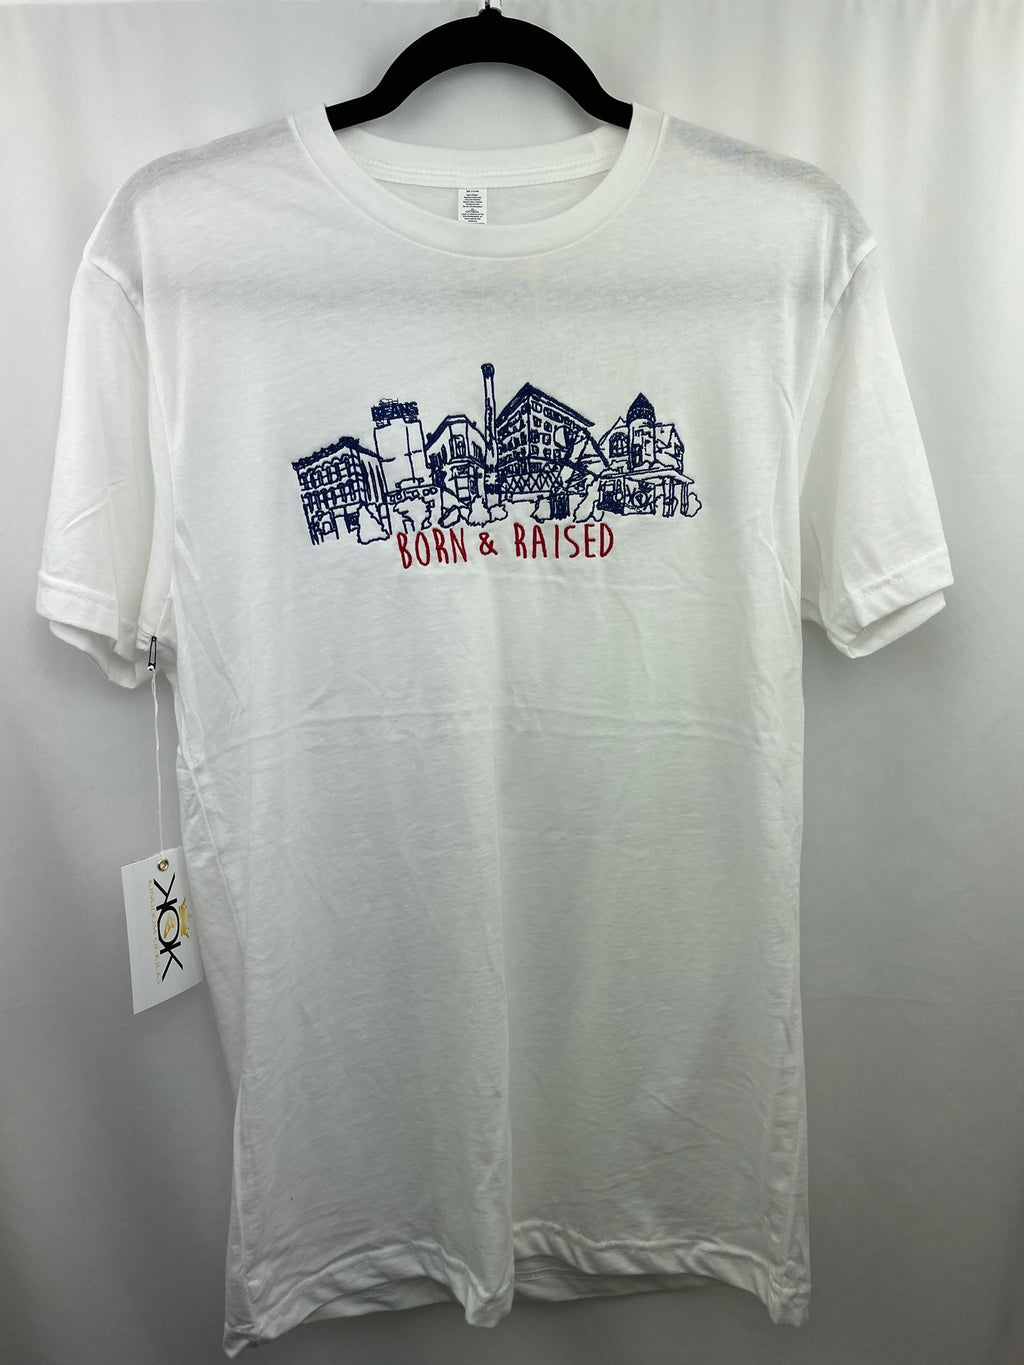 KOK Navy/Red Born & Raised Tee White Embroidered